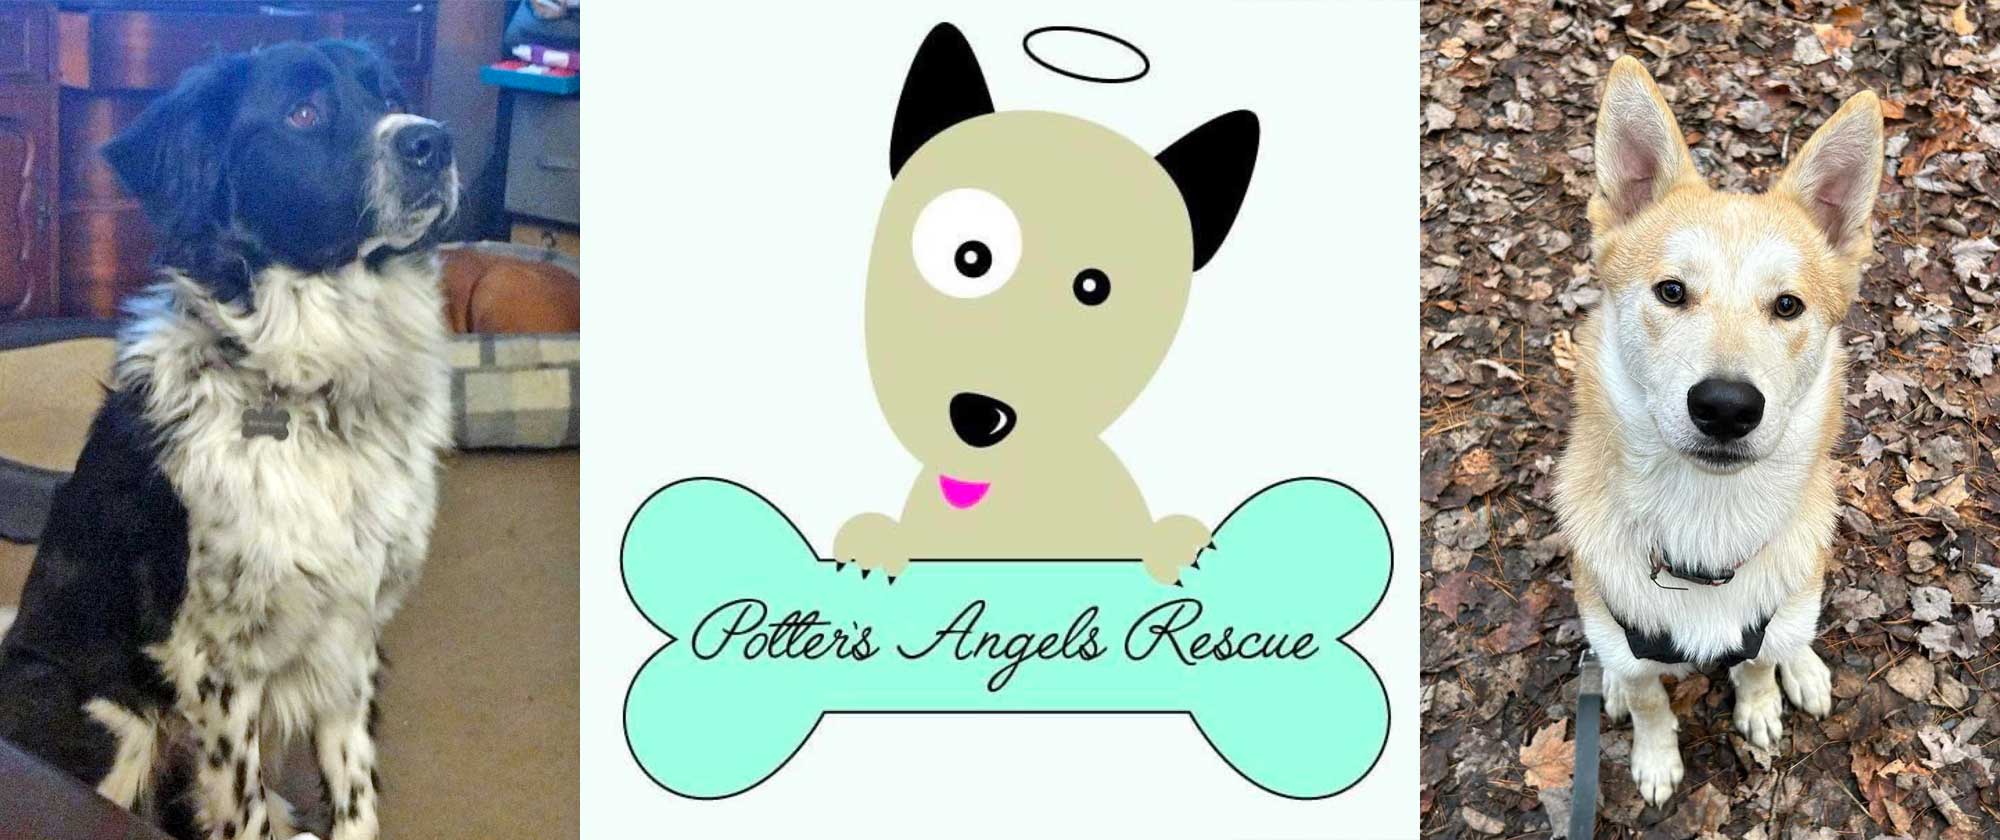 Potters Angels Rescue feature image with logo and two dogs' photos